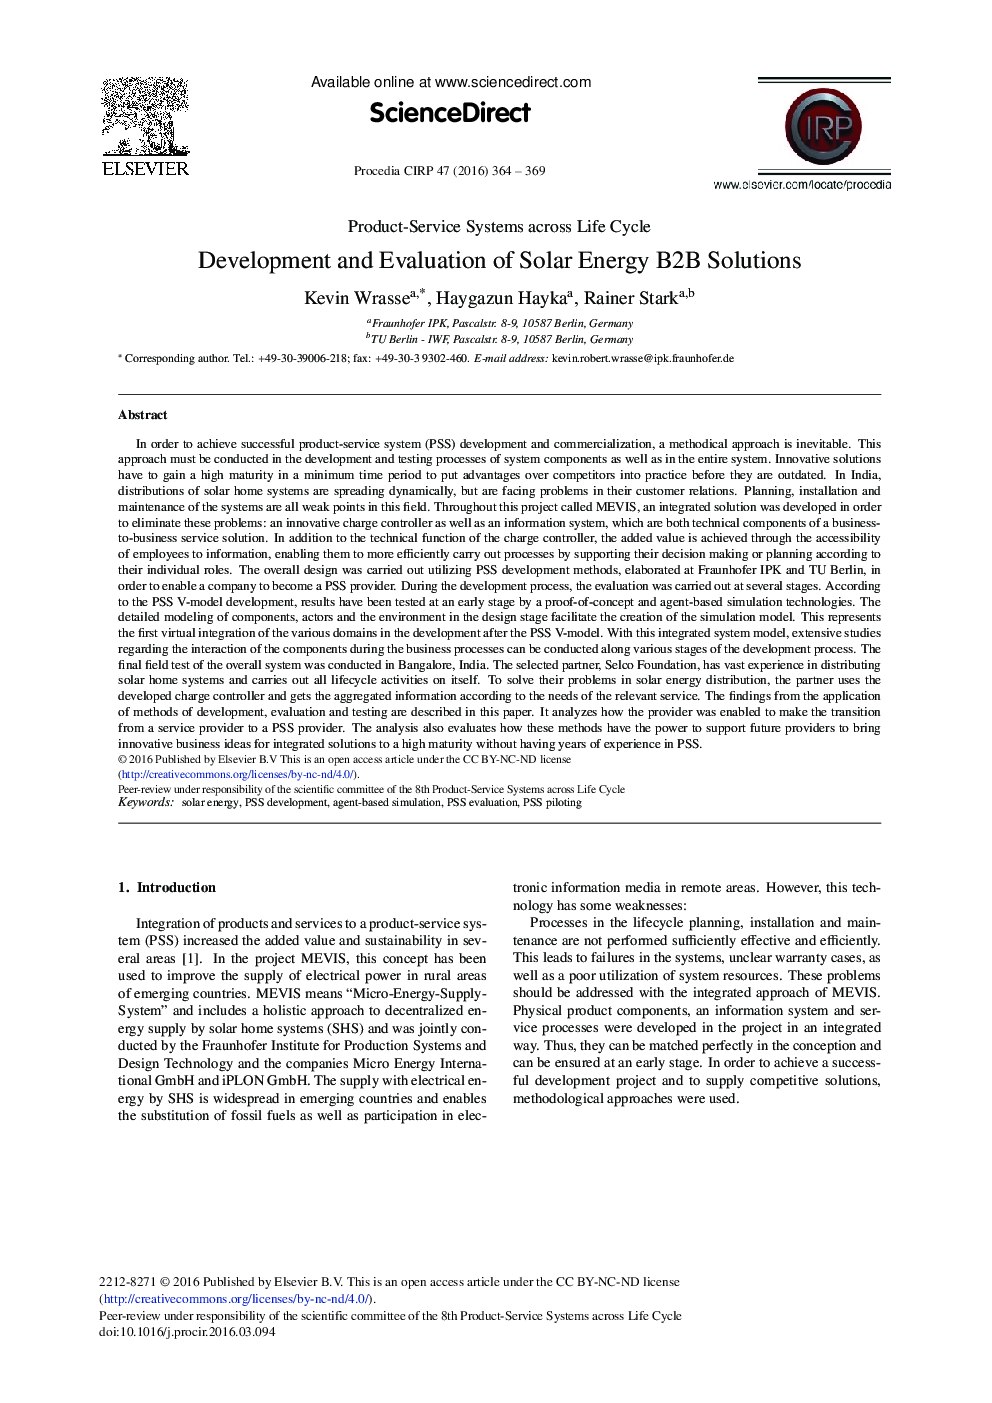 Development and Evaluation of Solar Energy B2B Solutions 